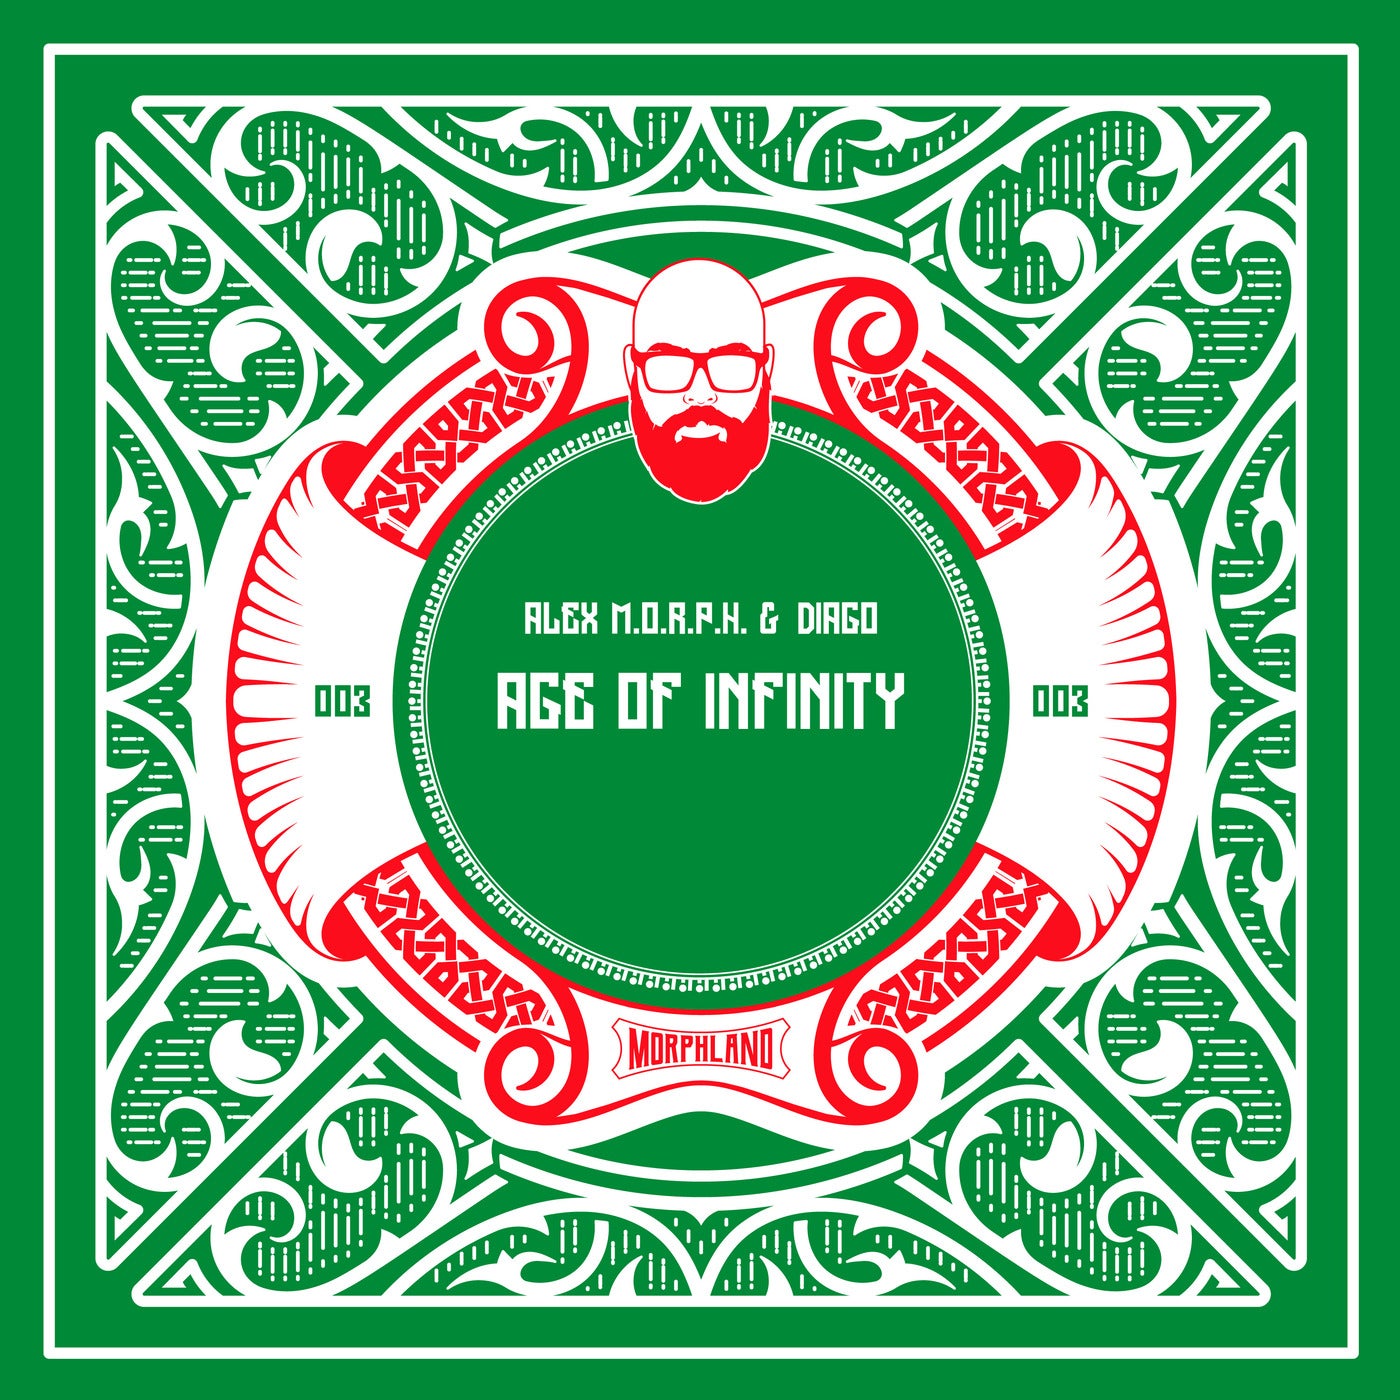 Age of Infinity